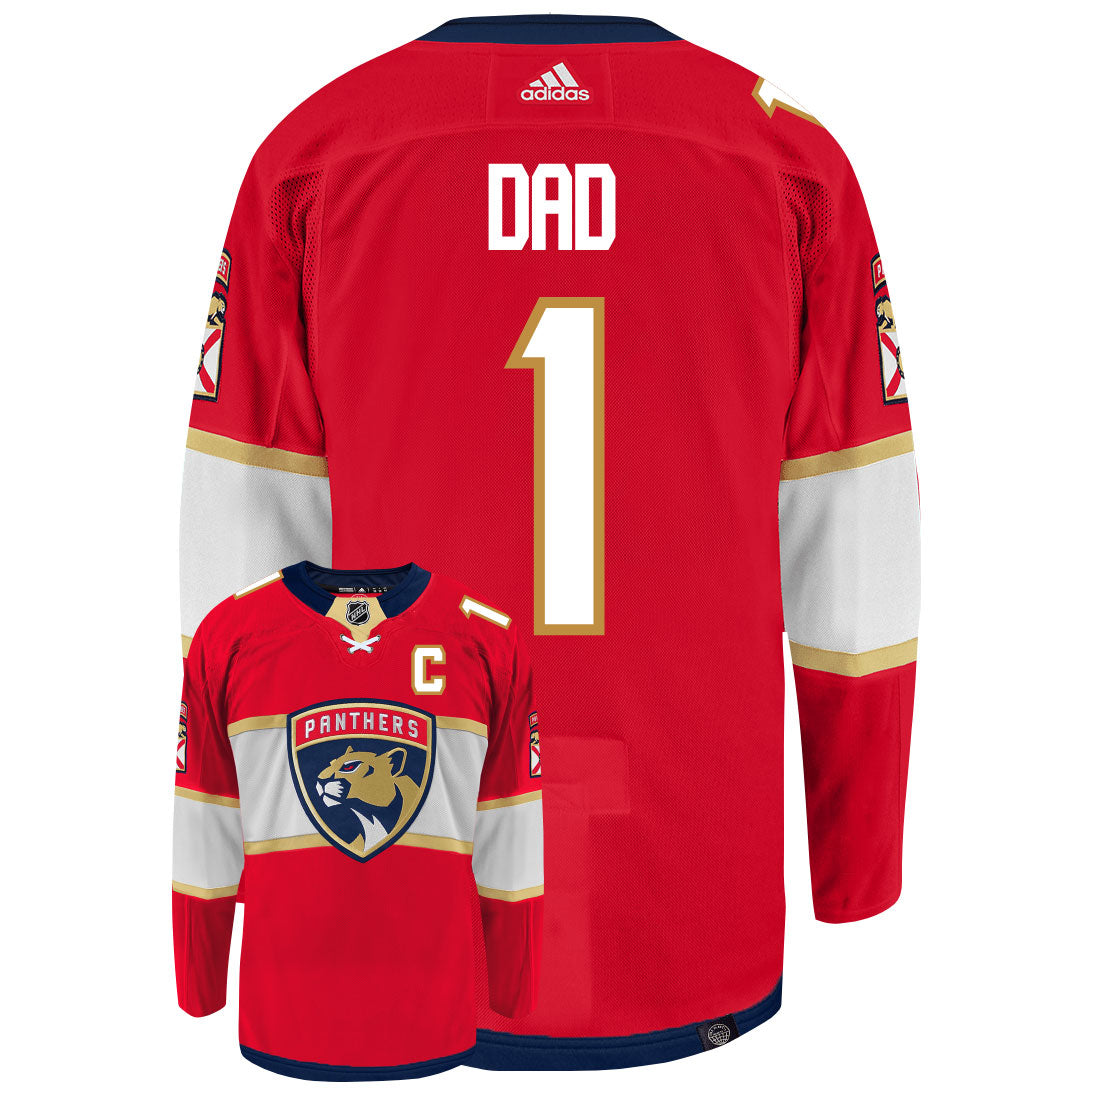 Florida Panthers Dad Number One Adidas Primegreen Authentic NHL Hockey Jersey - Back/Front View